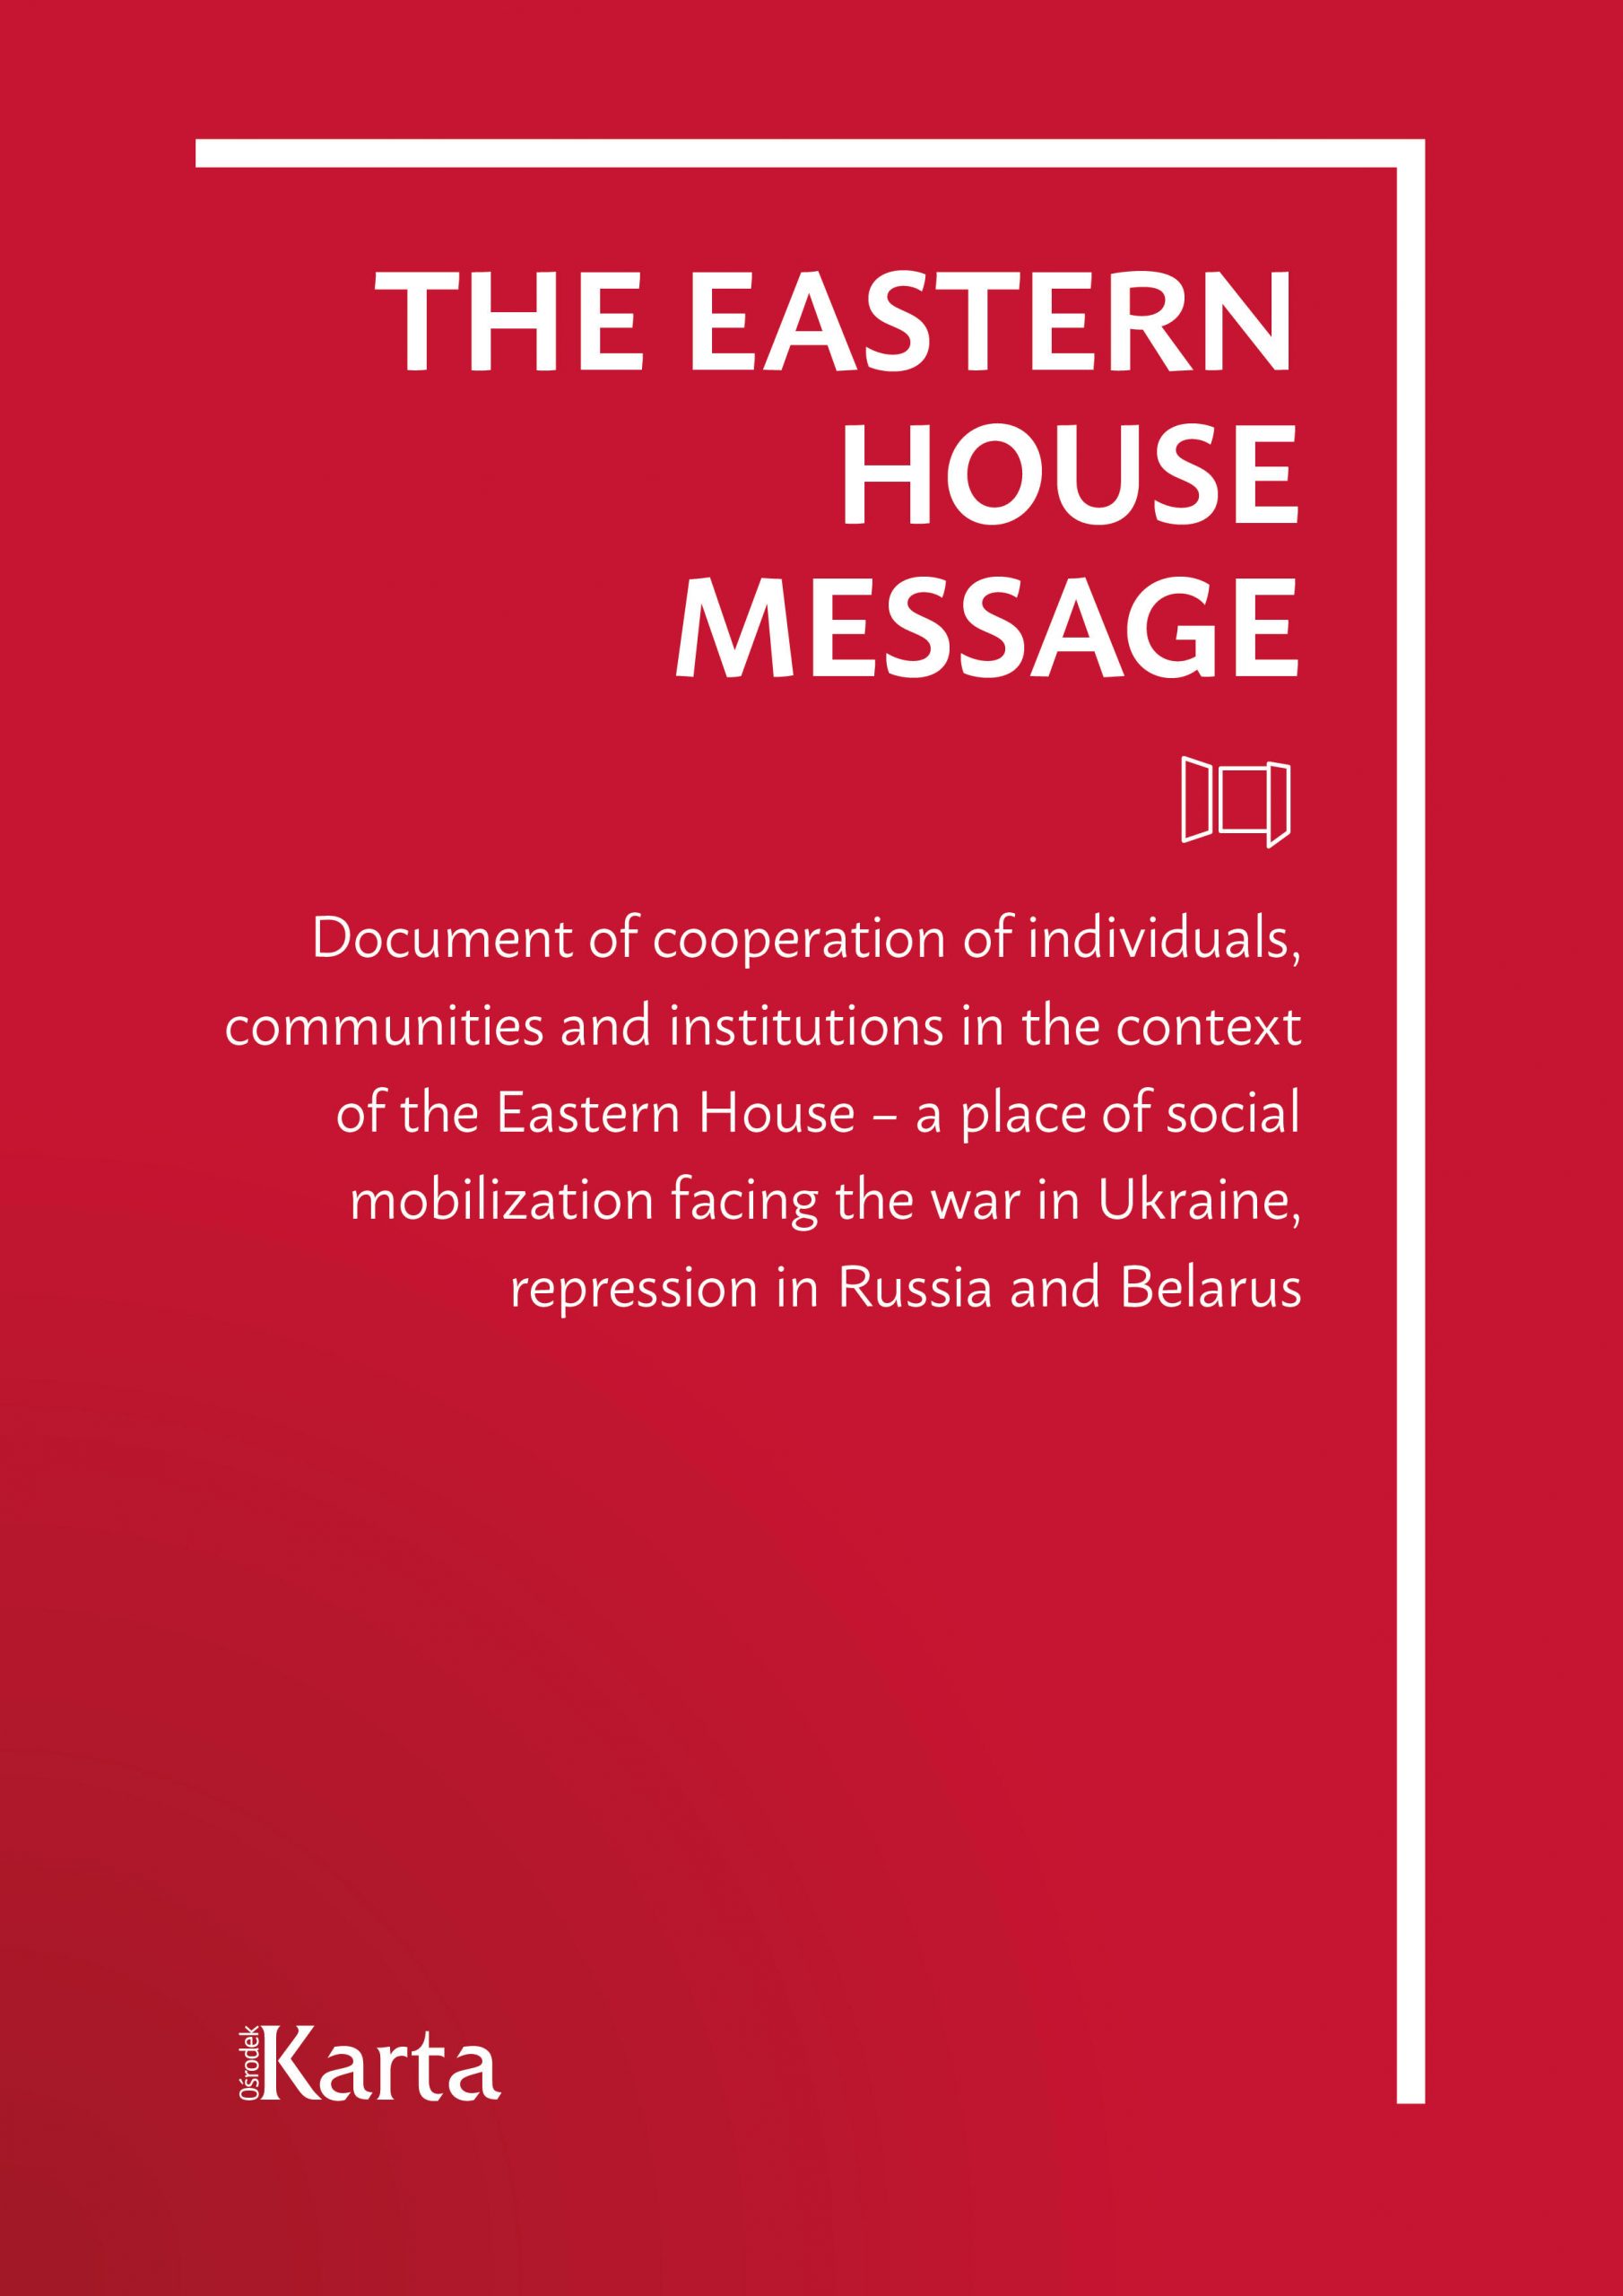 The Eastern House Message